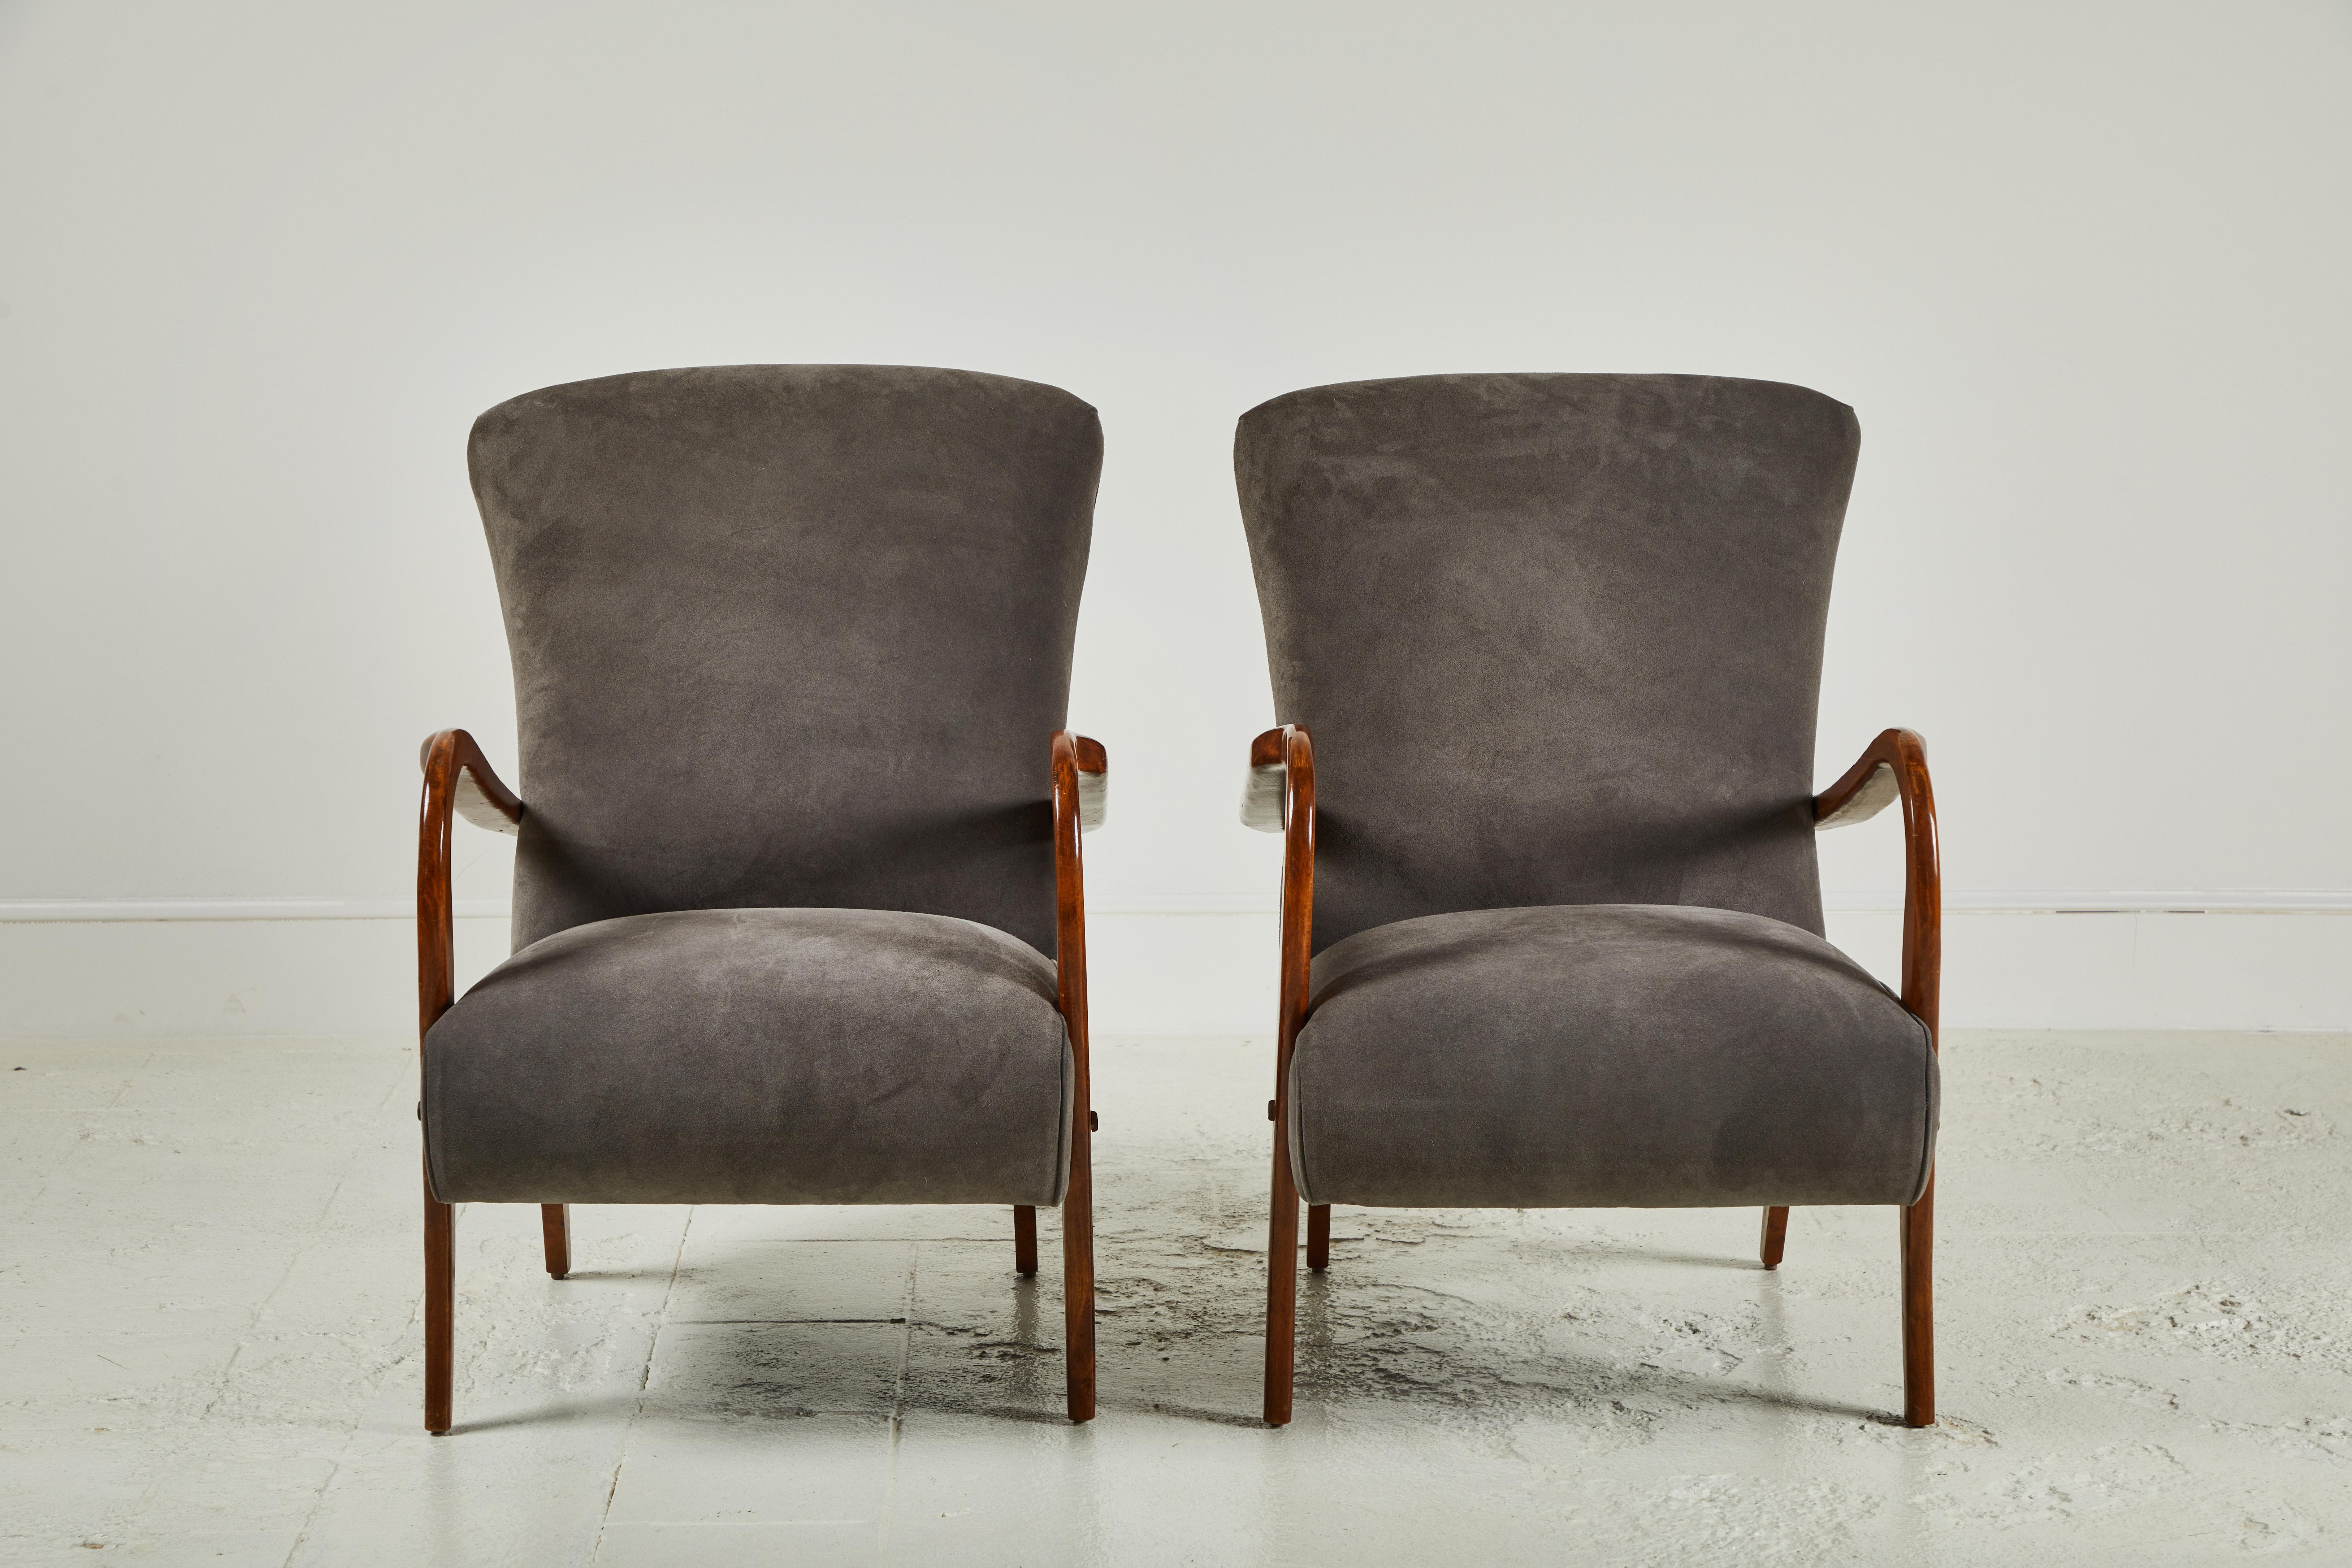 Pair of vintage Italian armchairs upholstered in grey suede. The wood finish is original, the chairs offer a modern and elegant silhouette.